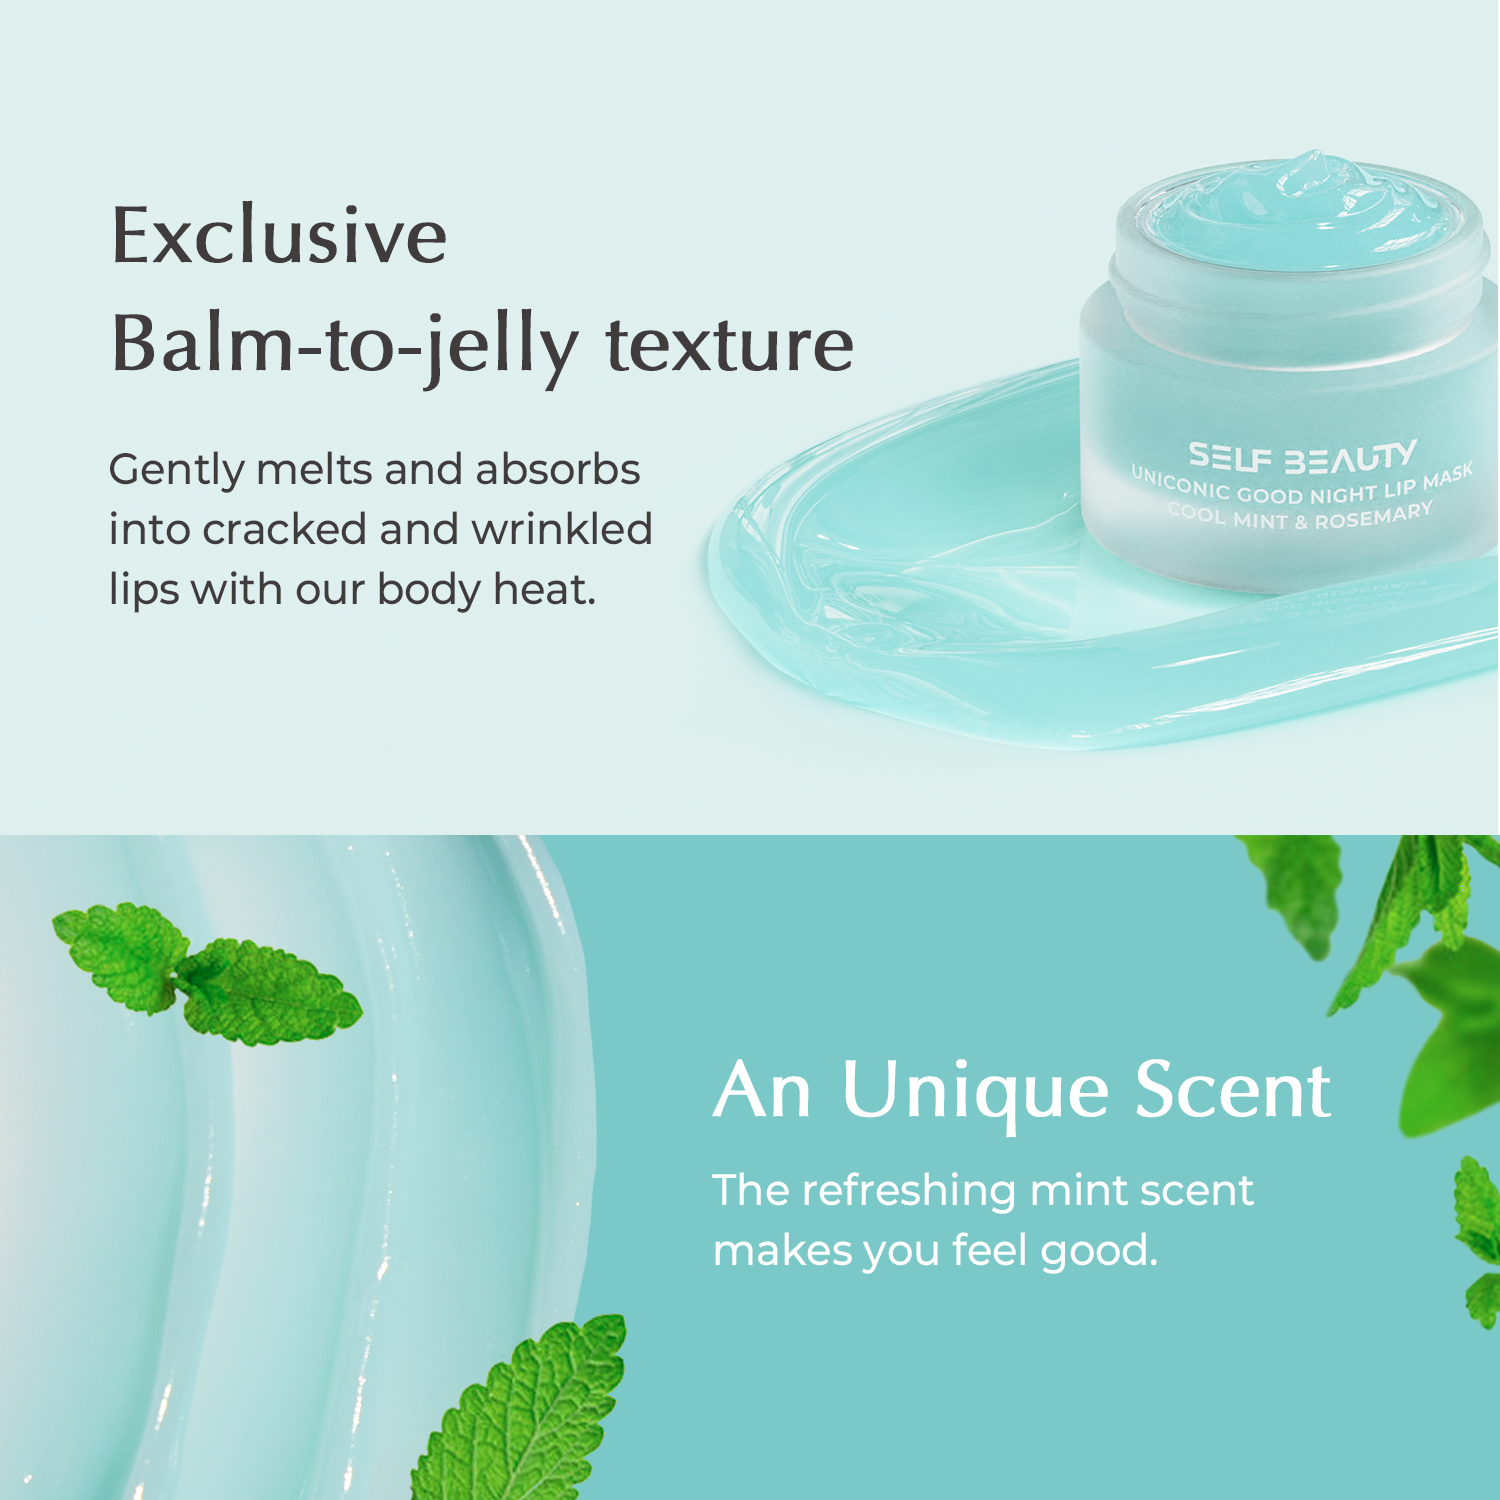 SELF BEAUTY Cool Mint & Rosemary Lip Mask 0.51oz - Vegan, Smooth Texture, Overnight Lip Treatment With Peppermint, Intensive Lip Repair, Cruelty-Free 14.5g - SELF BEAUTY